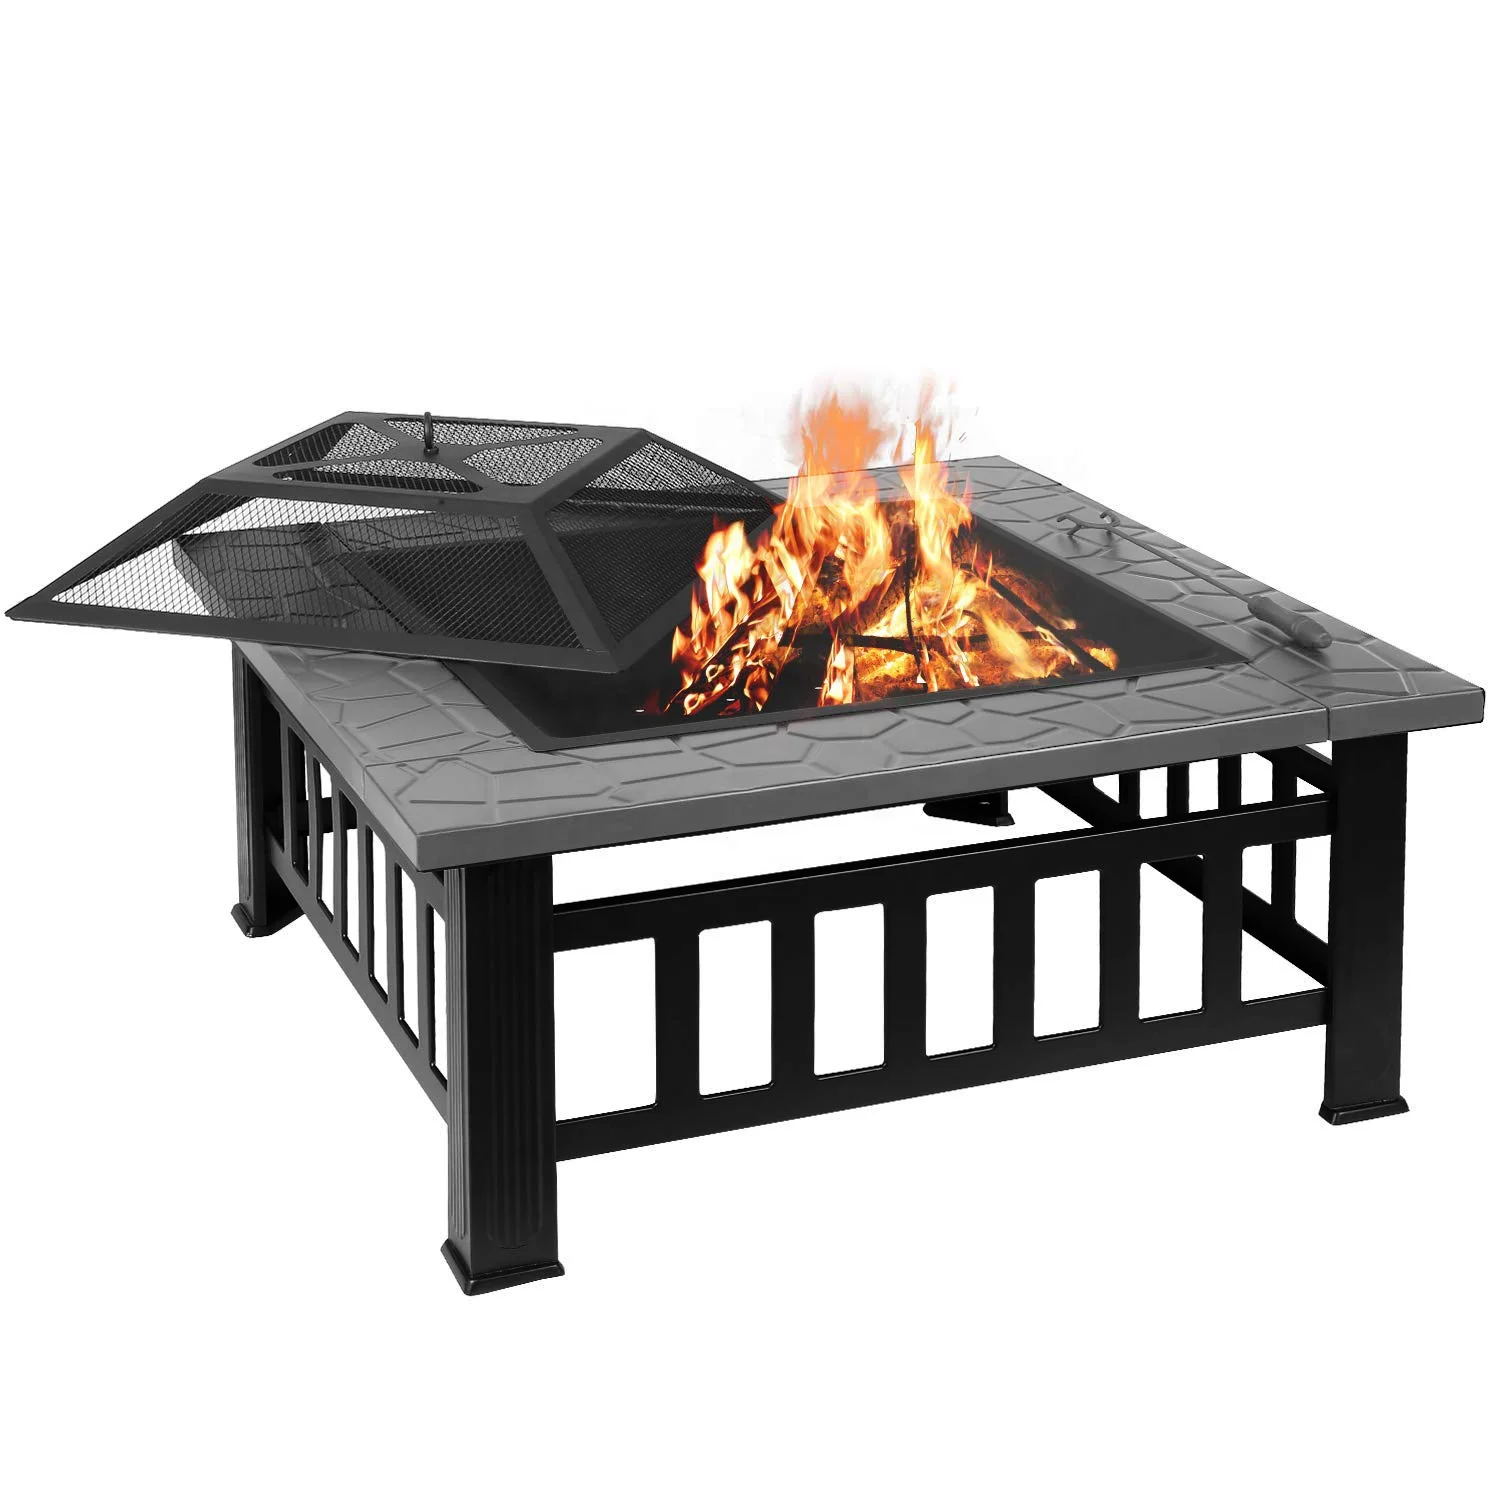 

2021 Hot Selling Design 32 Inch Grey Outdoor Backyard Patio Garden Metal Table BBQ Wood Fired Fire Pits